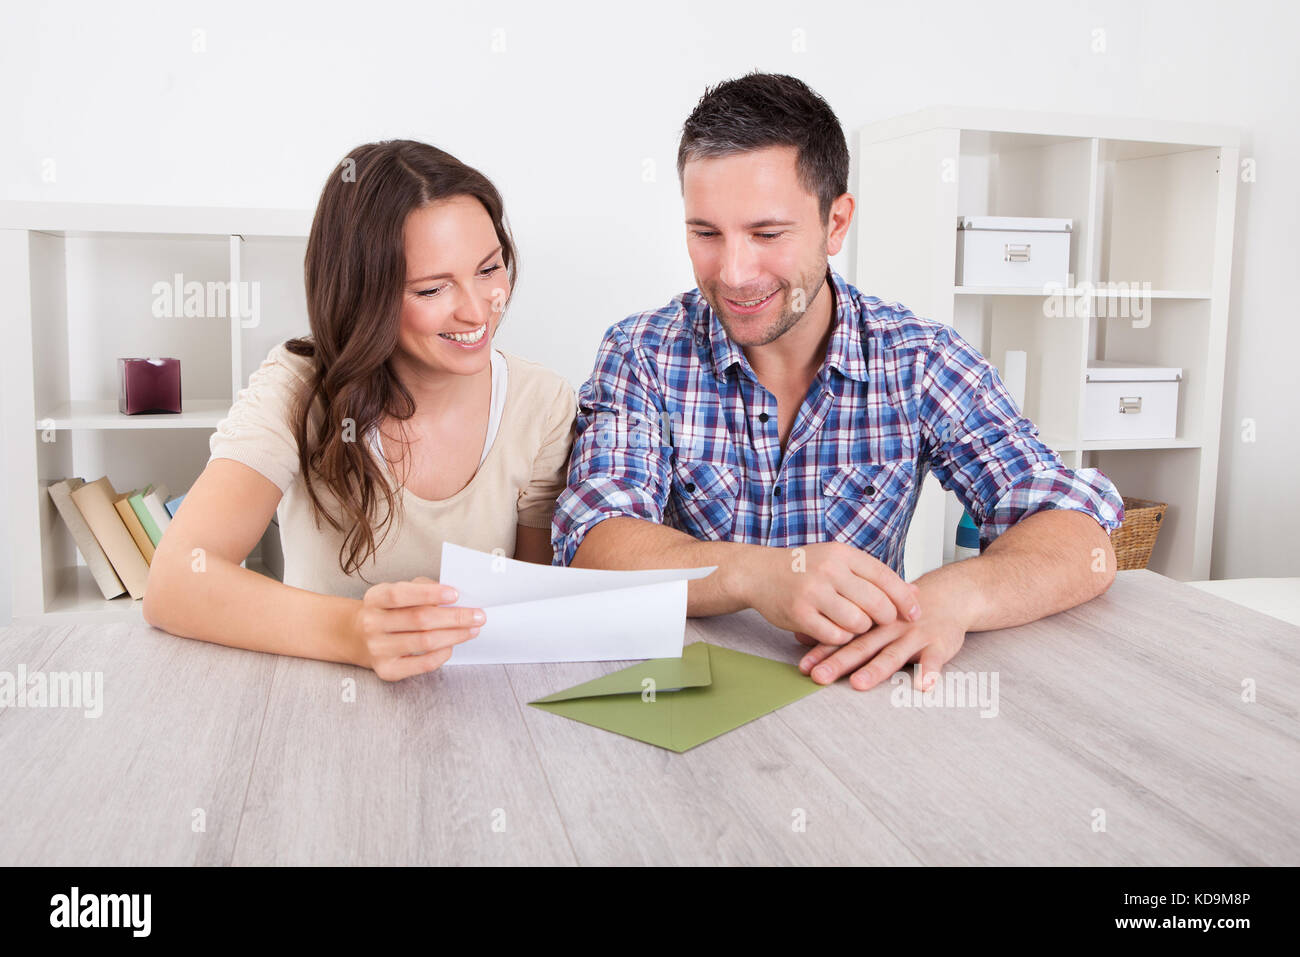 Portrait Of A Happy Young Couple At Home Reading Paper Banque D'Images